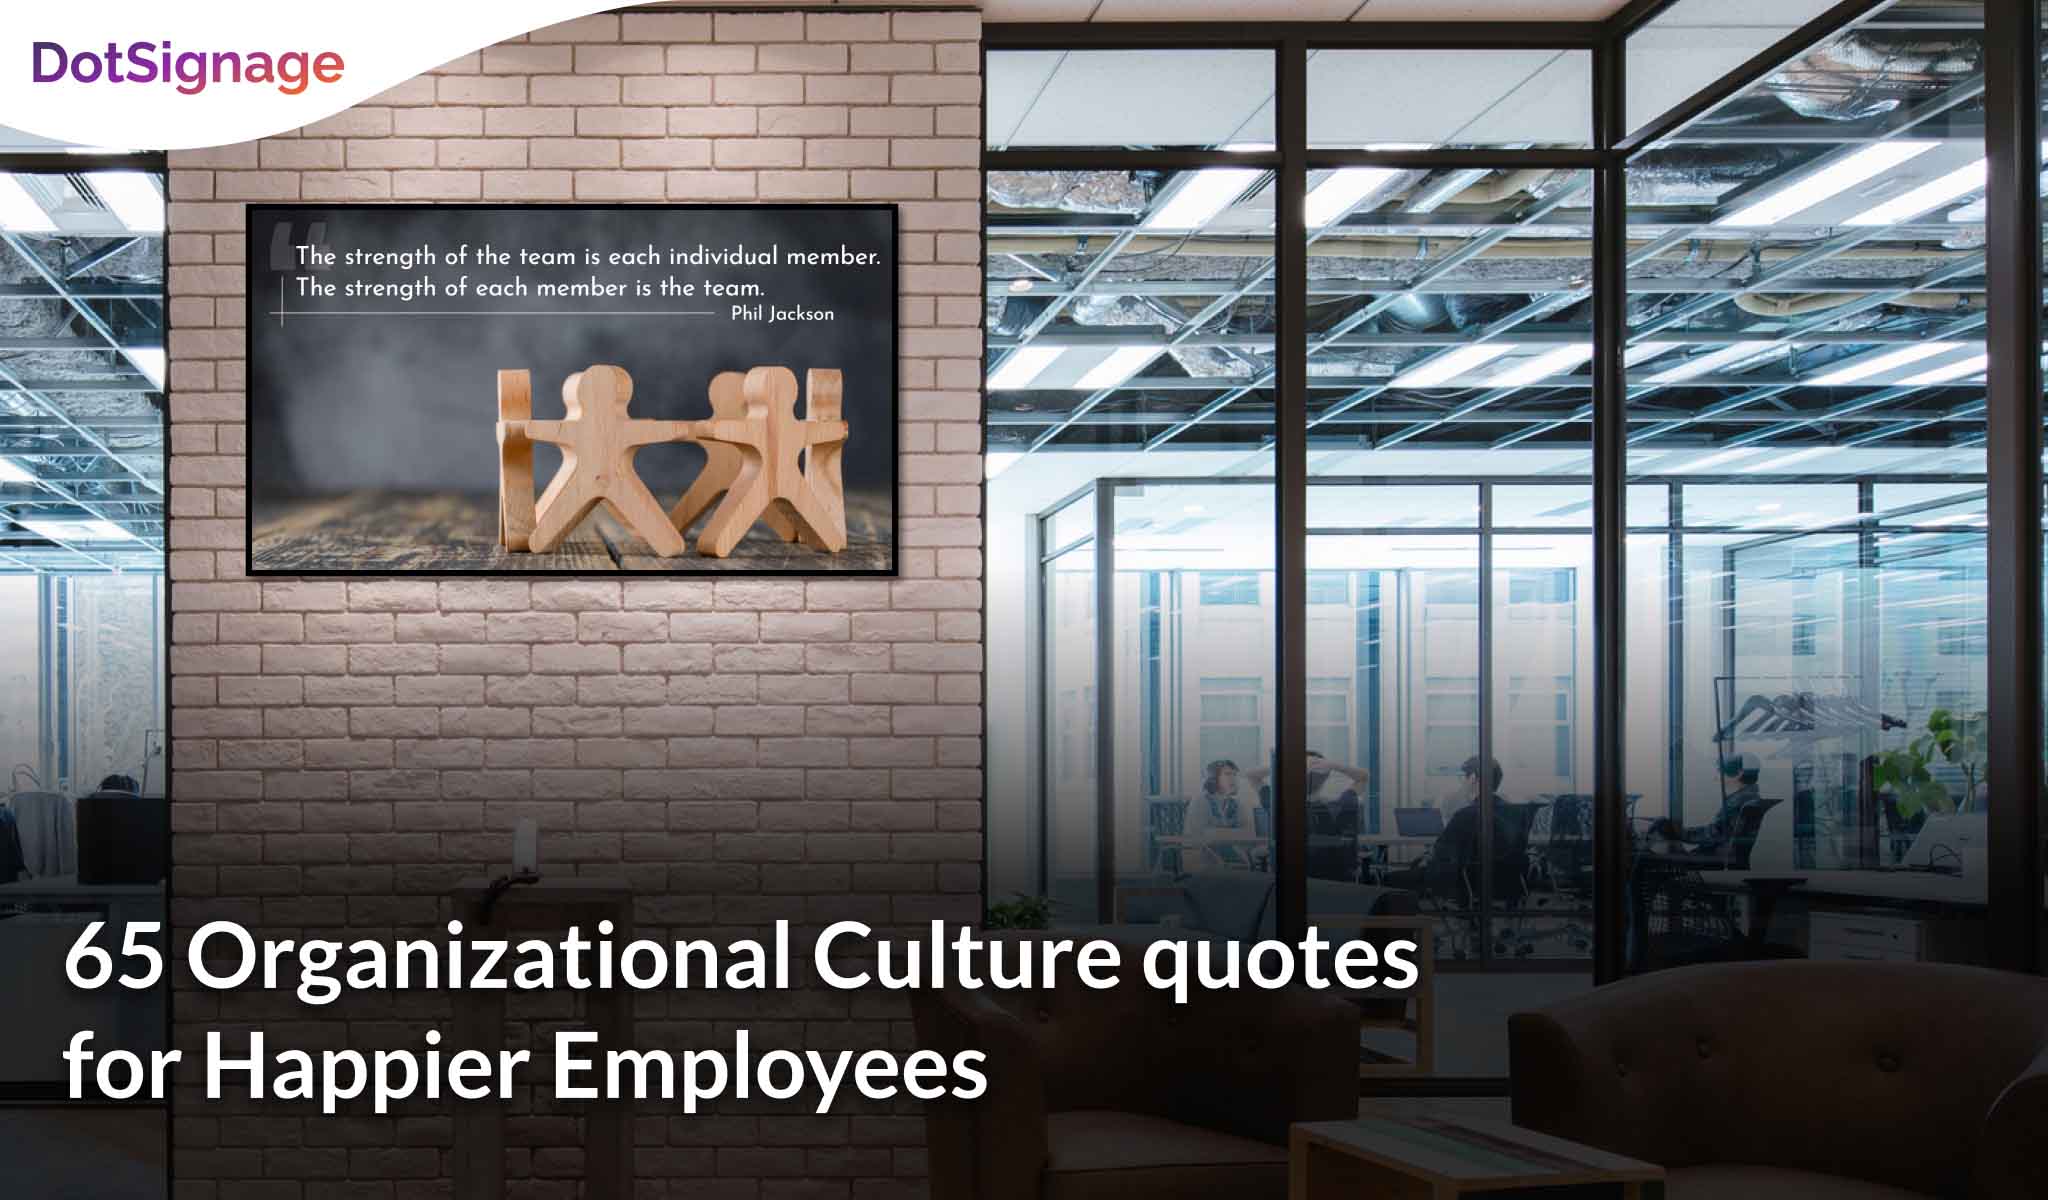 display company culture quote on corporate tv screen